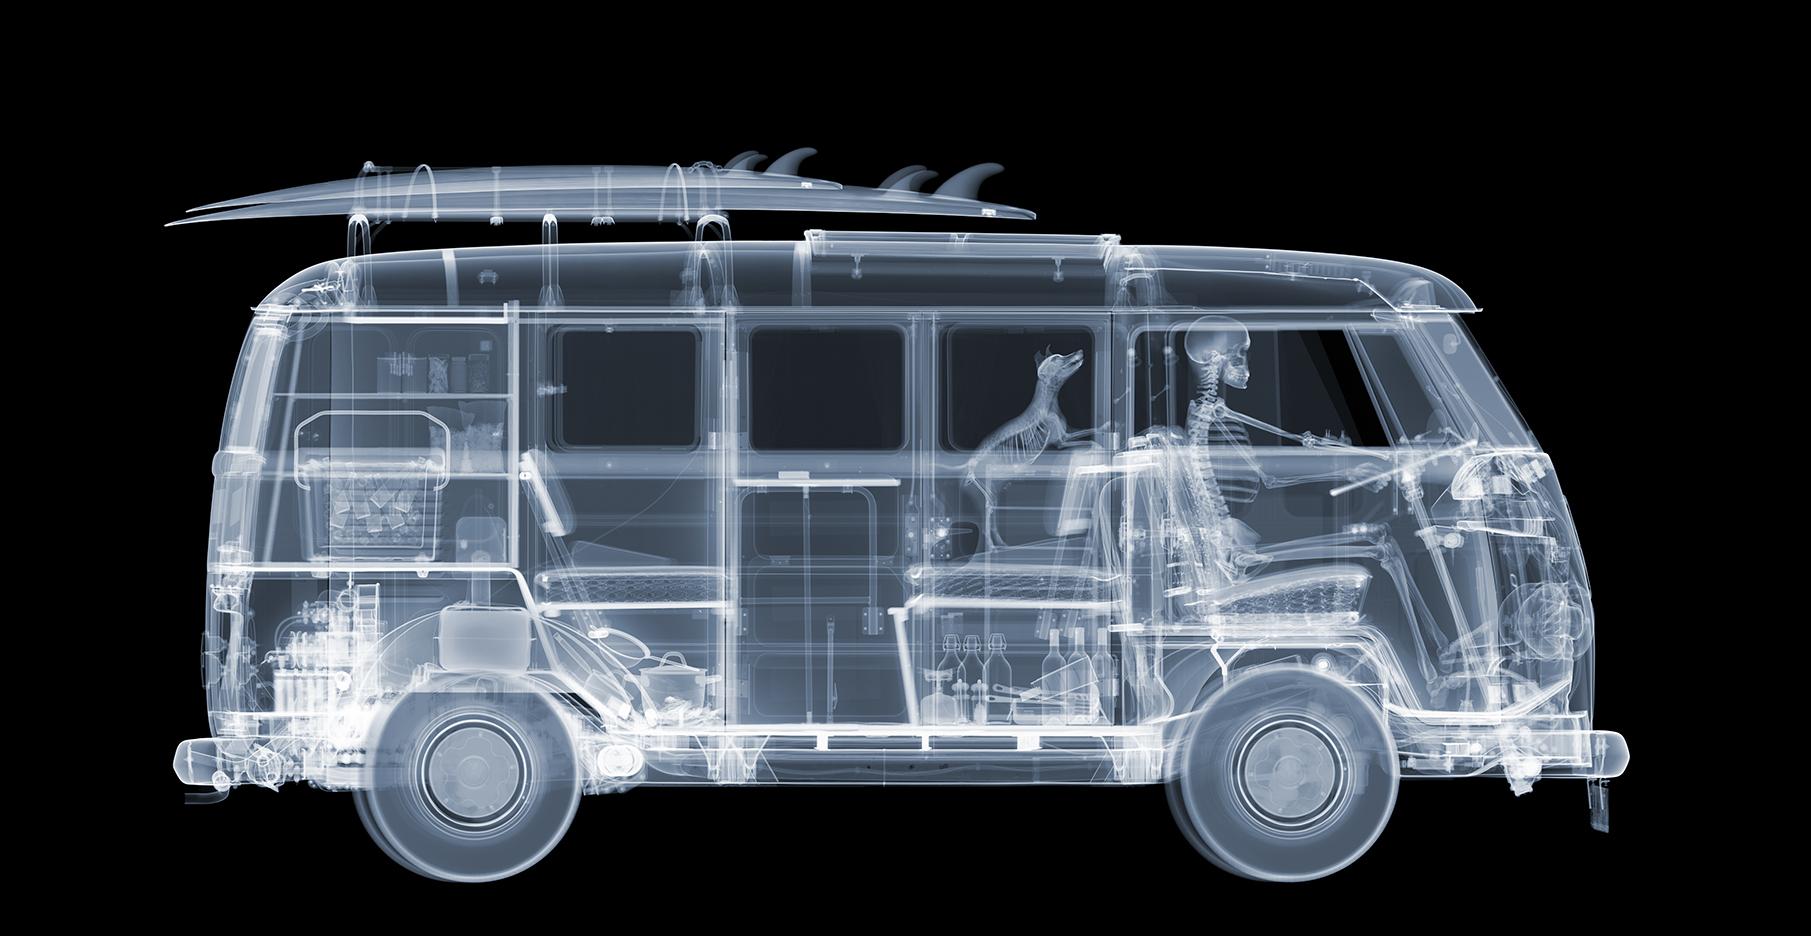 "Camper Van on the Road"
36 1/2 x 71 inches 
X-Ray C-Type print with Diasec frame
Limited Edition of 15

Other Sizes Available
24 x 47 inches / $10,800
47 x 90 inches / $26,900

X-Ray print of a camper van. Artist Nick Veasey explores the